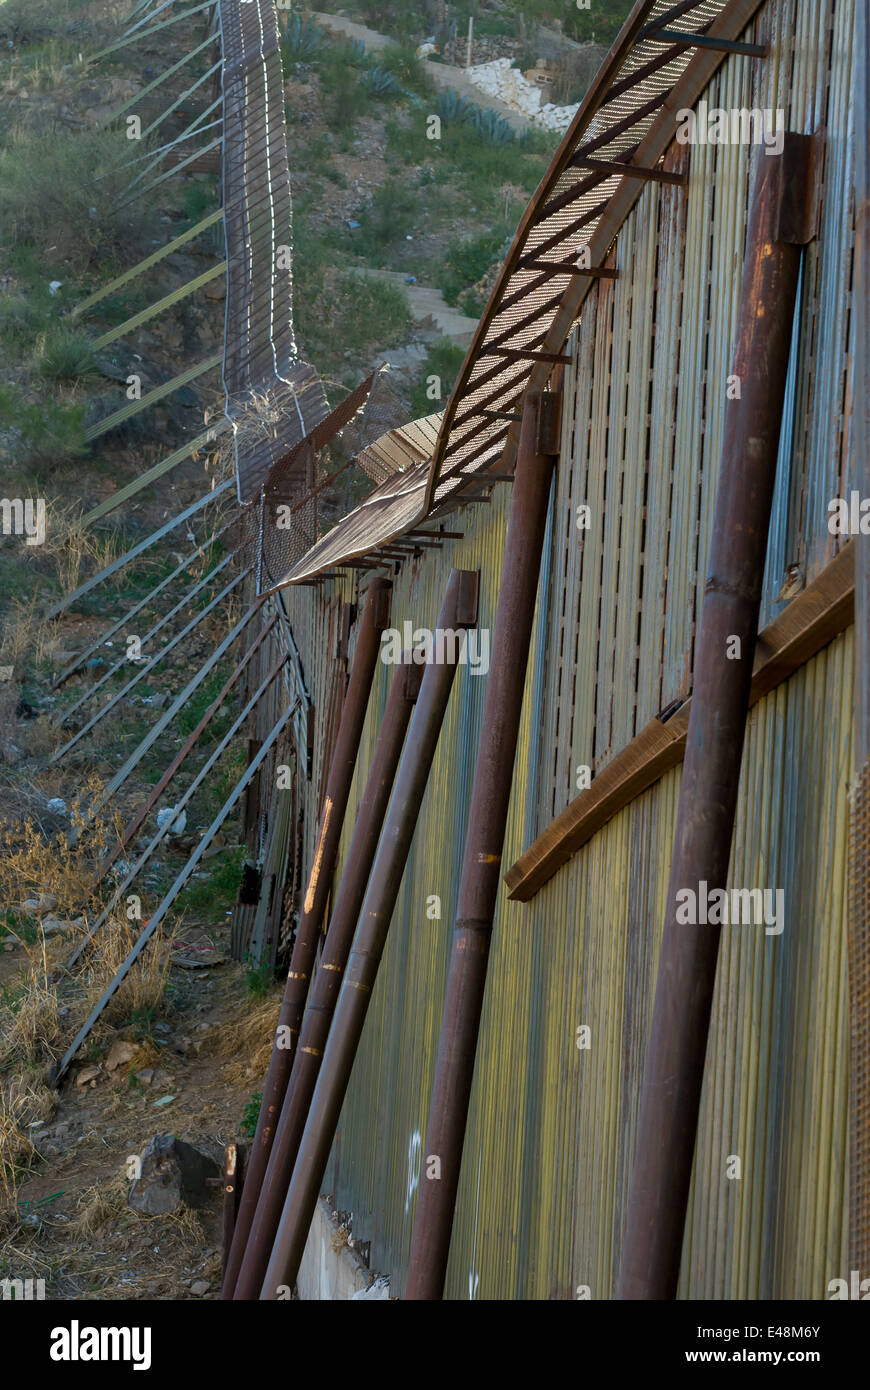 Detail of US border fence in Nogales Arizona USA, looking southeast toward Sonora Mexico Stock Photo